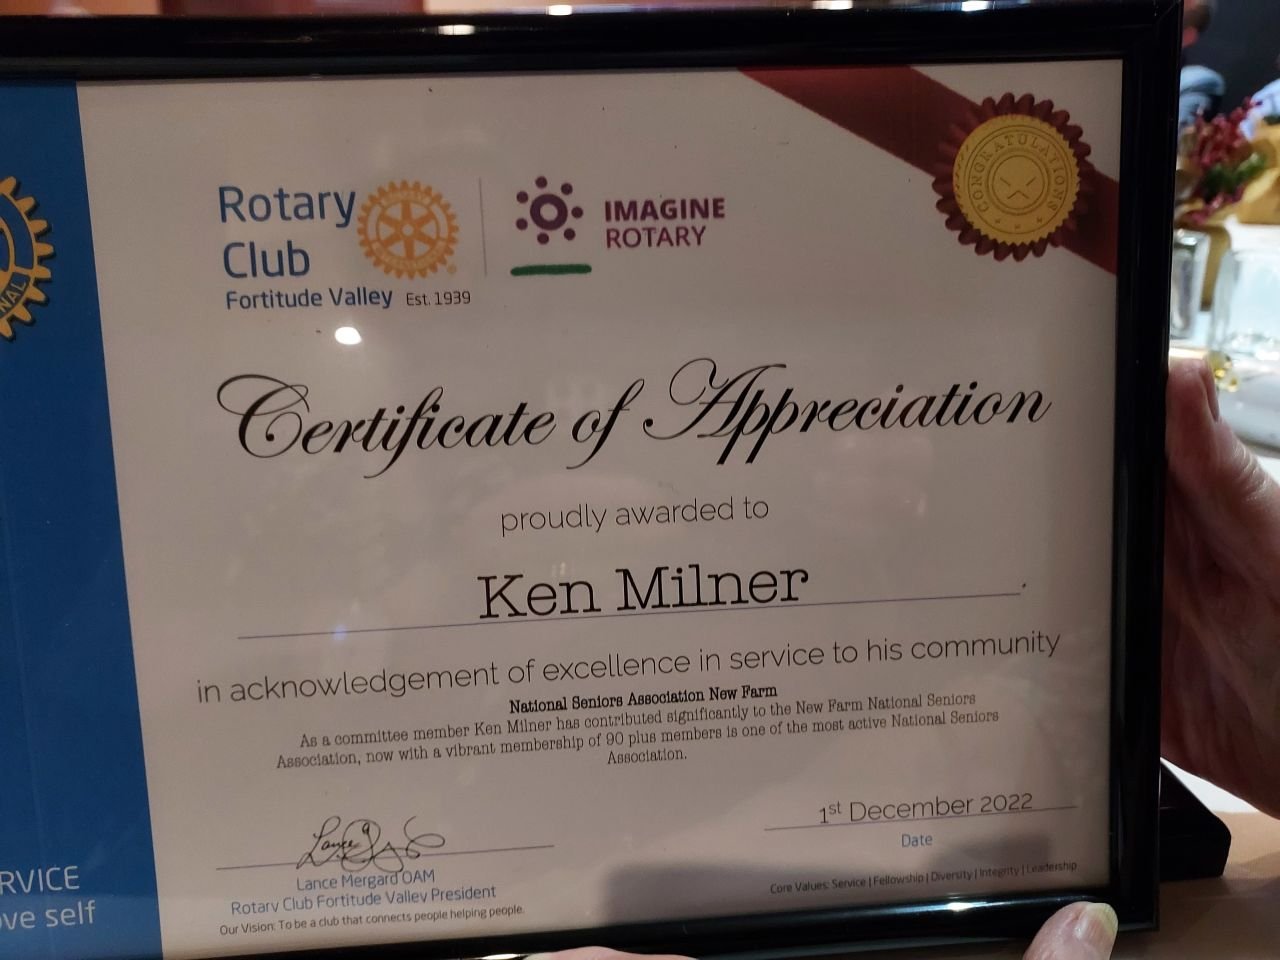 COMMUNITY AWARD: Rotary Club Certificate of Appreciation awarded to Ken Millner for Excellence of Service to the Community. December 2022